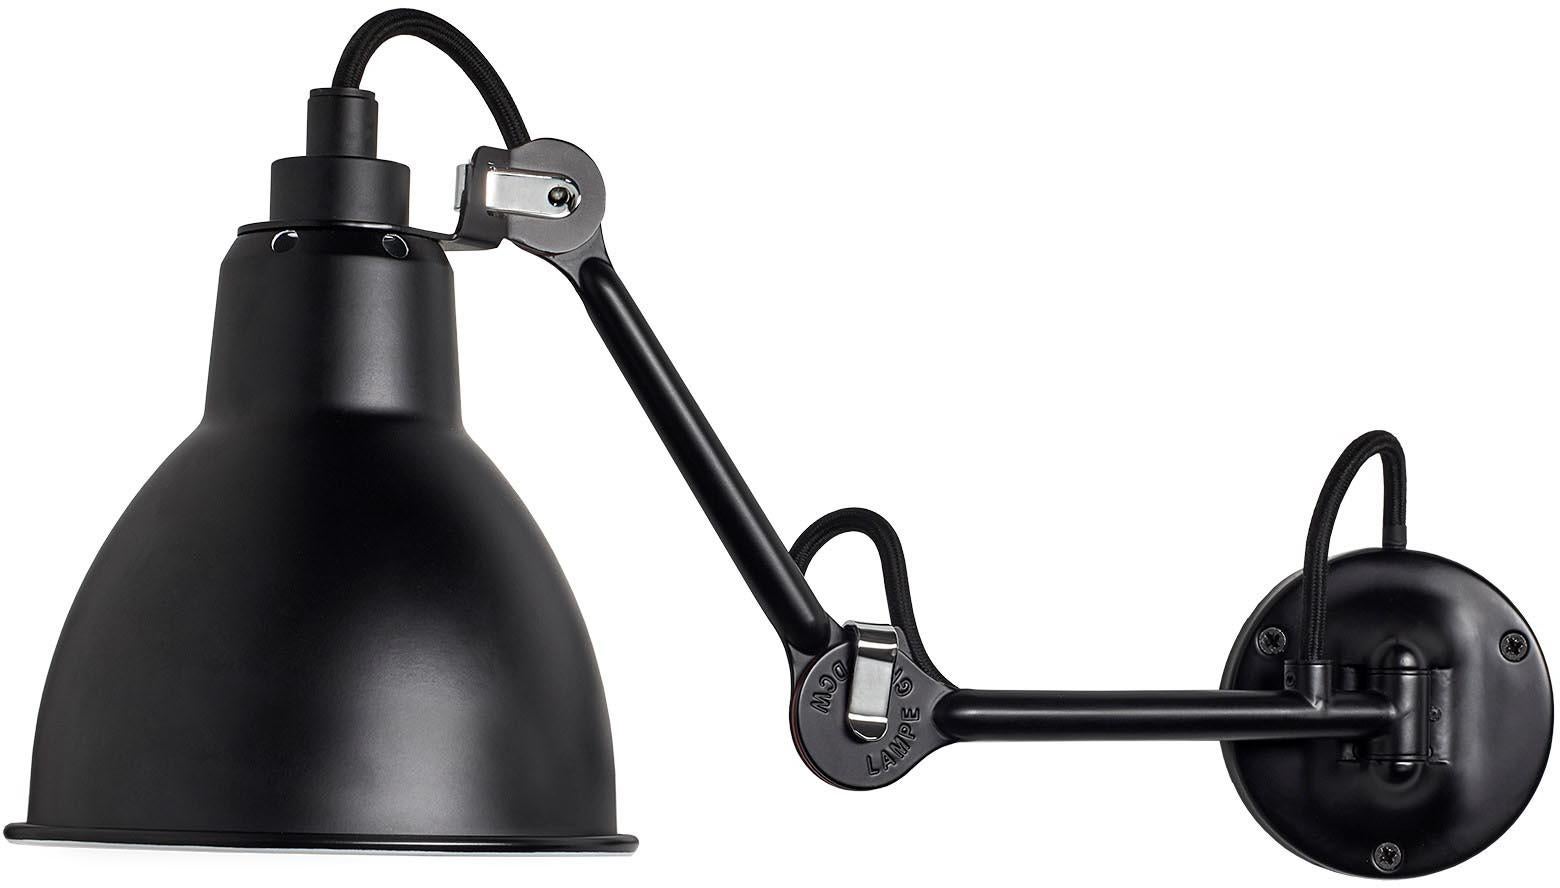 DCW Editions Lampe Gras N°204 Wall Lamp in Black Steel Arm and Black Shade by Bernard-Albin Gras
 
 In 1921 Bernard-Albin GRAS designed a series of lamps for use in offices and in industrial environments. The GRAS lamp, as it was subsequently